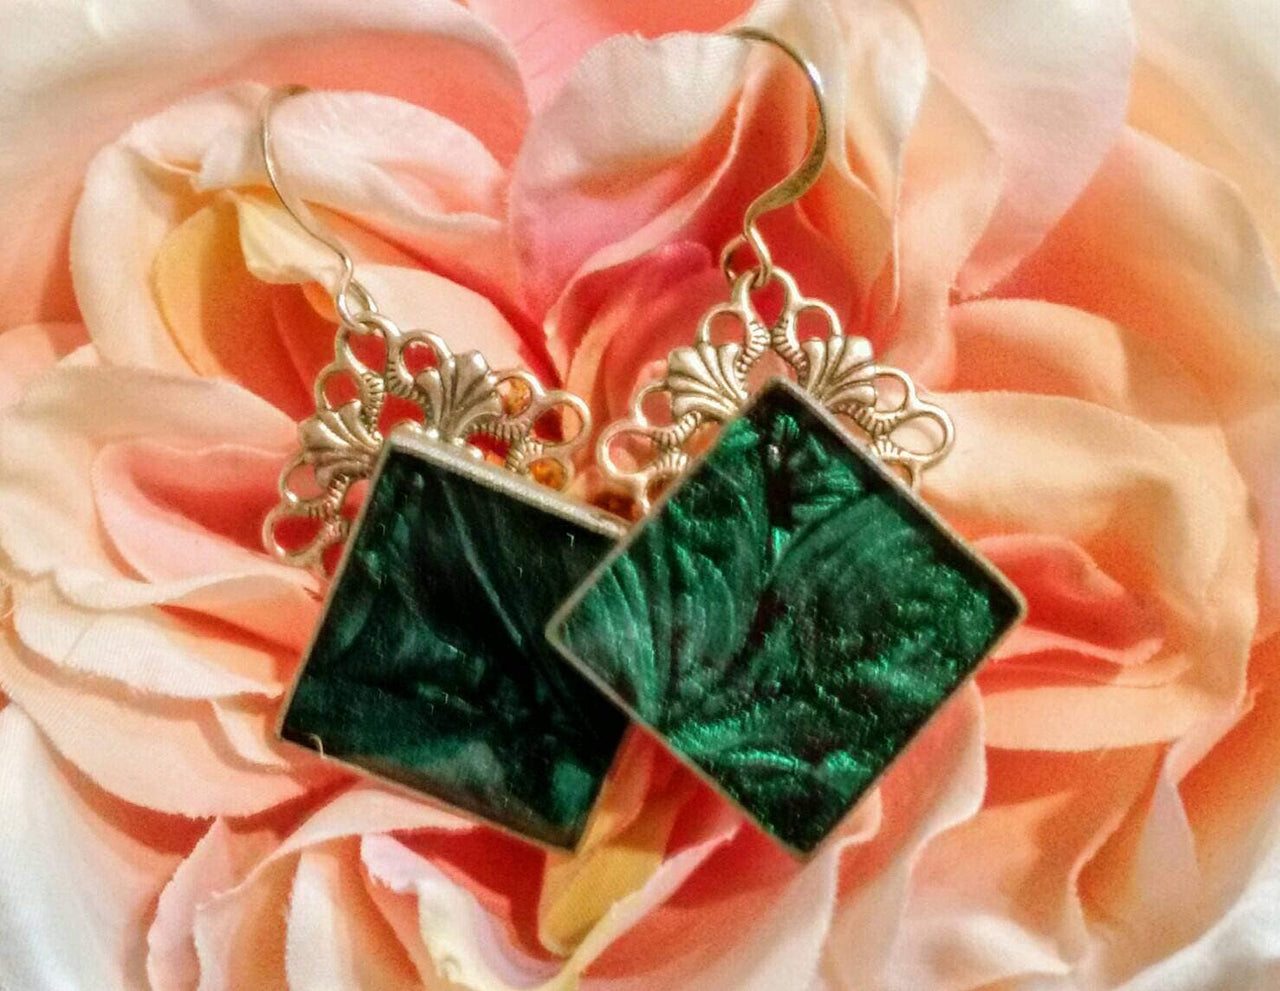 Emerald green Van Gogh stained glass on filigree earrings